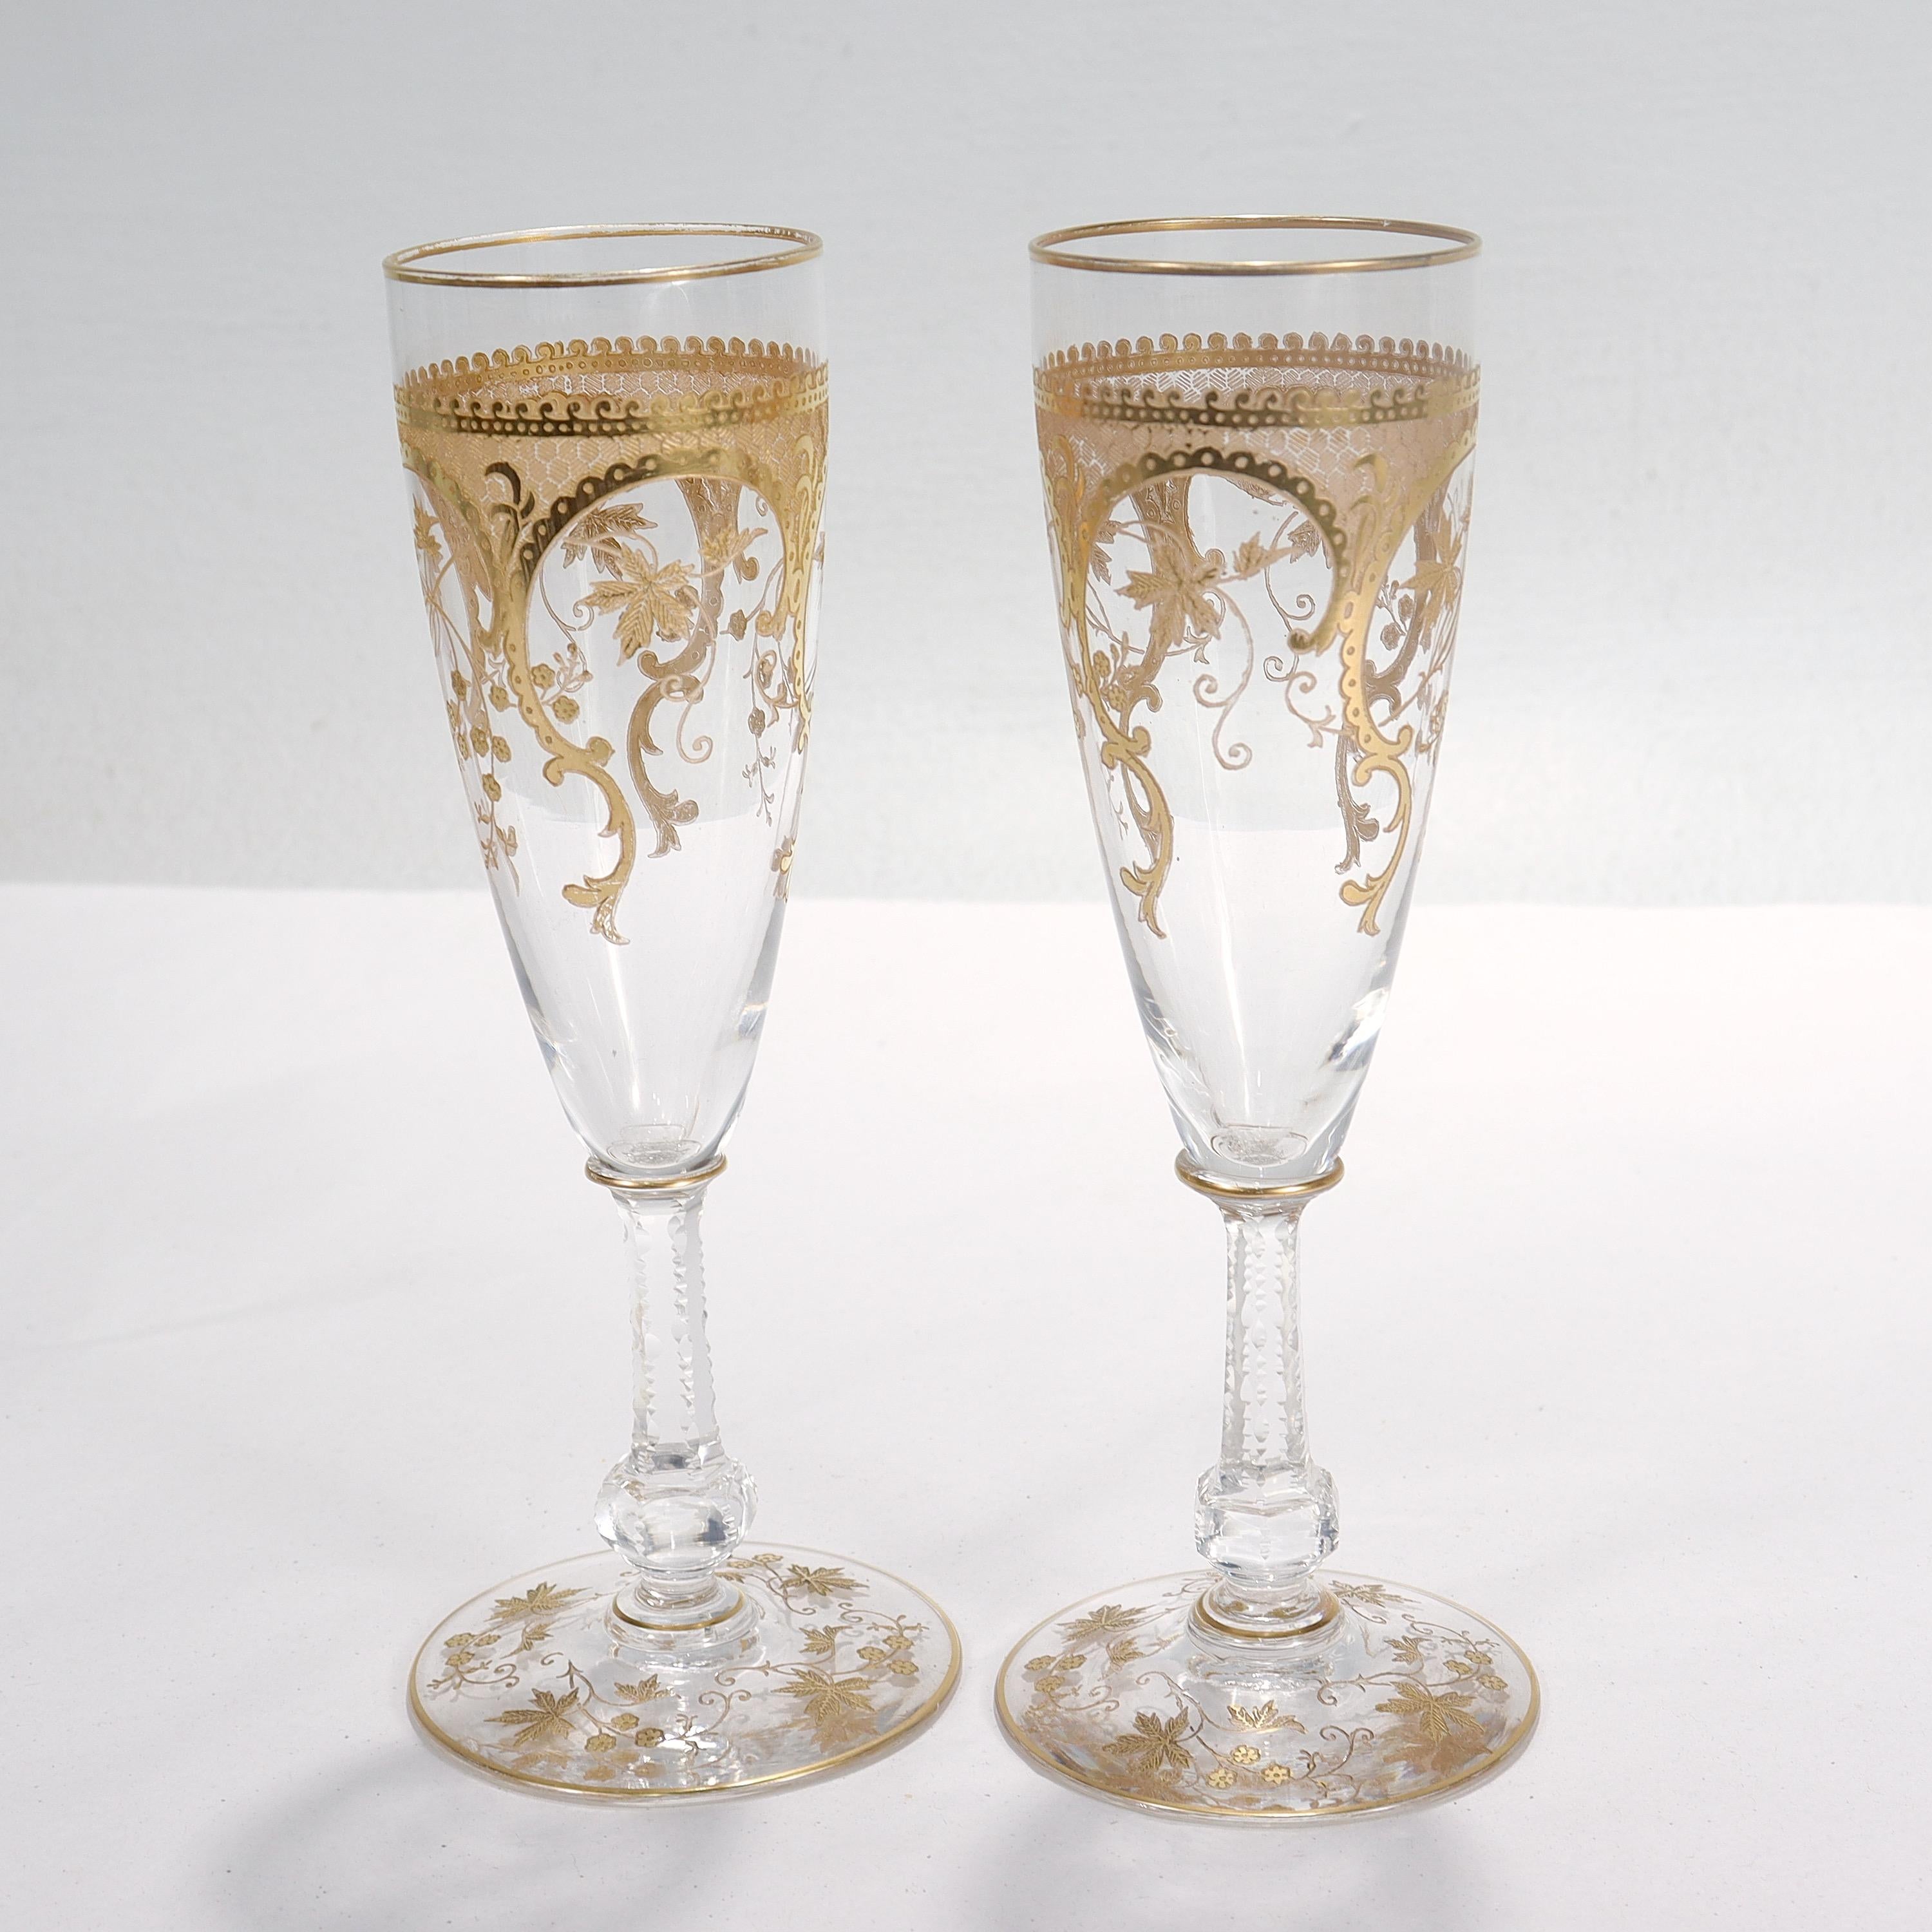 20th Century Pair of Richly Gilt Antique Etched & Cut Glass Champagne Stems or Flutes 